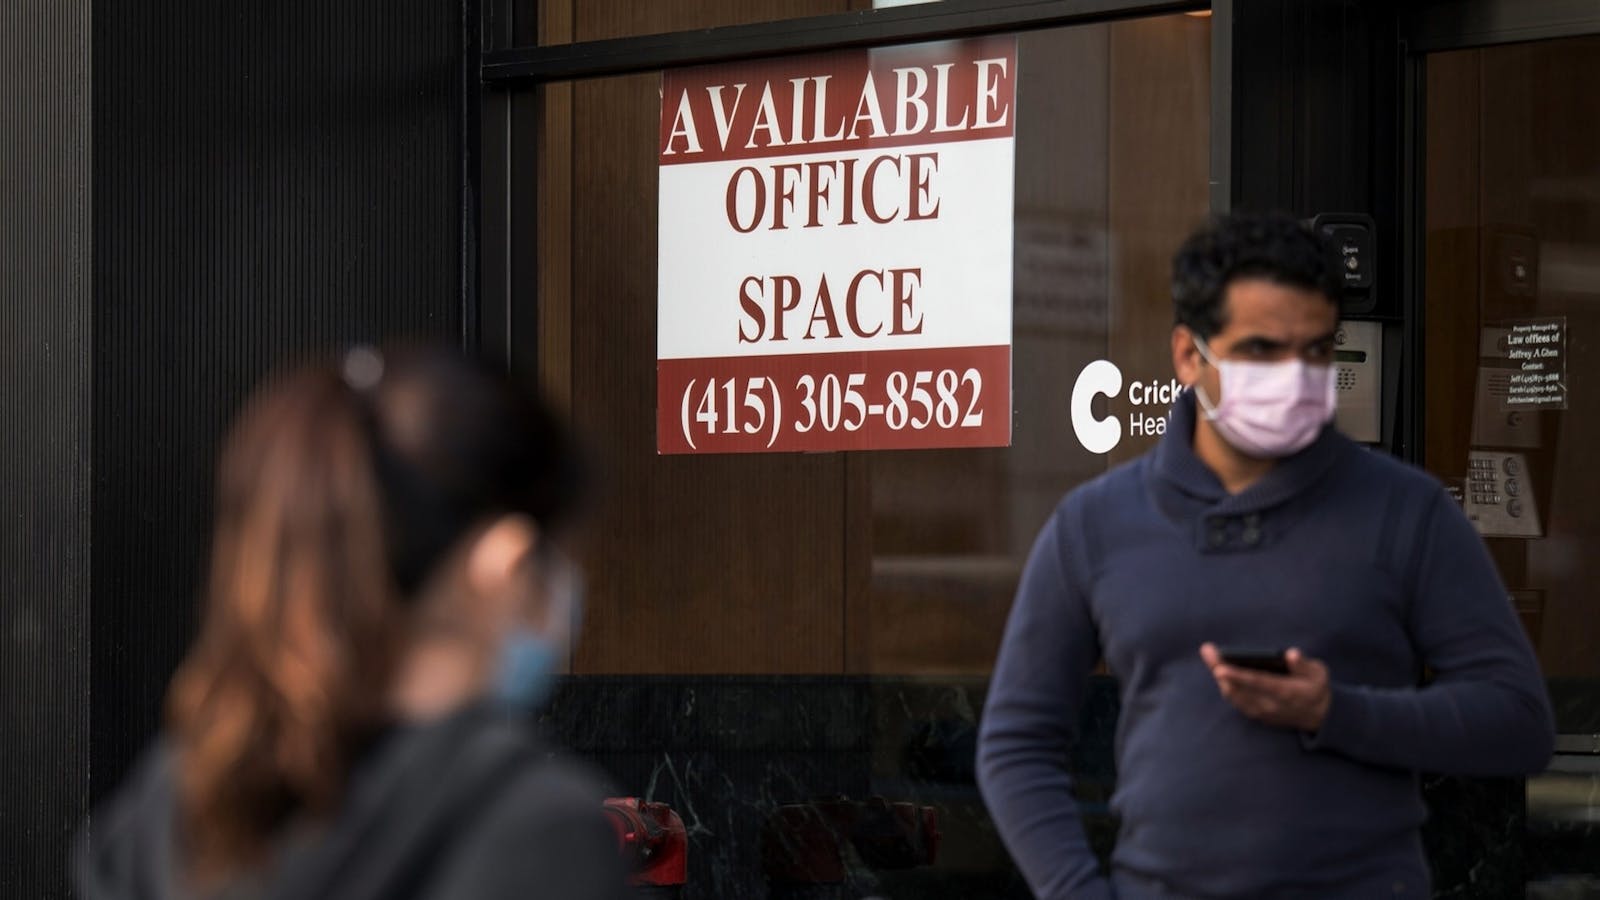 A street in San Francisco May 6. Even as coronavirus restrictions start to loosen, many office workers are likely to keep working from home. Photo: Bloomberg